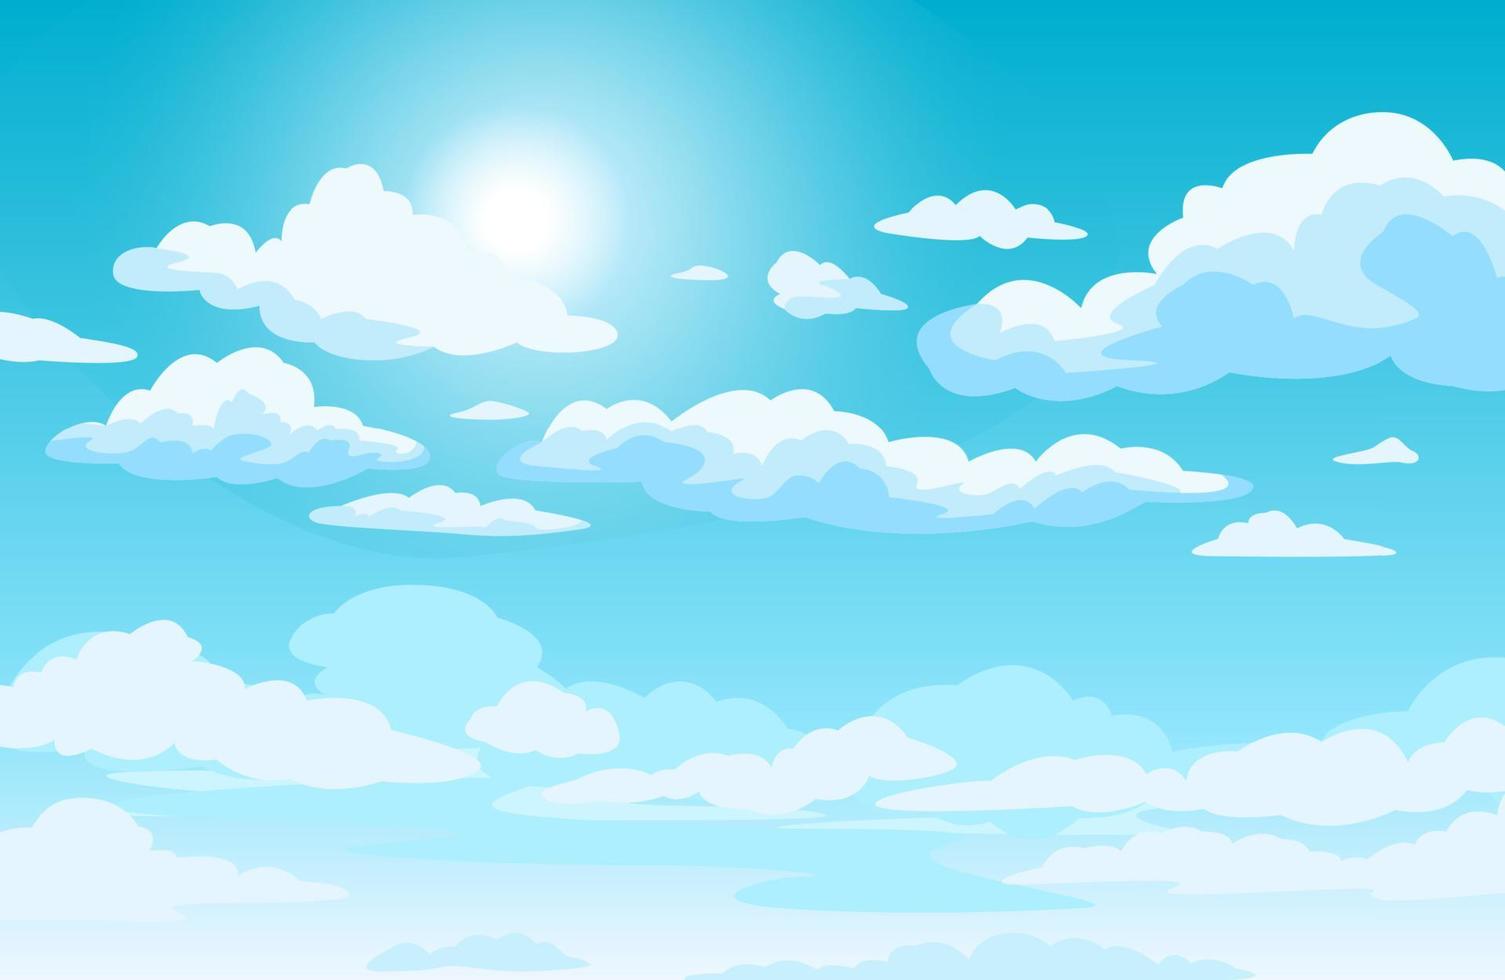 Blue sky with clouds. Anime style background with shining sun and white fluffy clouds. Sunny day sky scene cartoon vector illustration